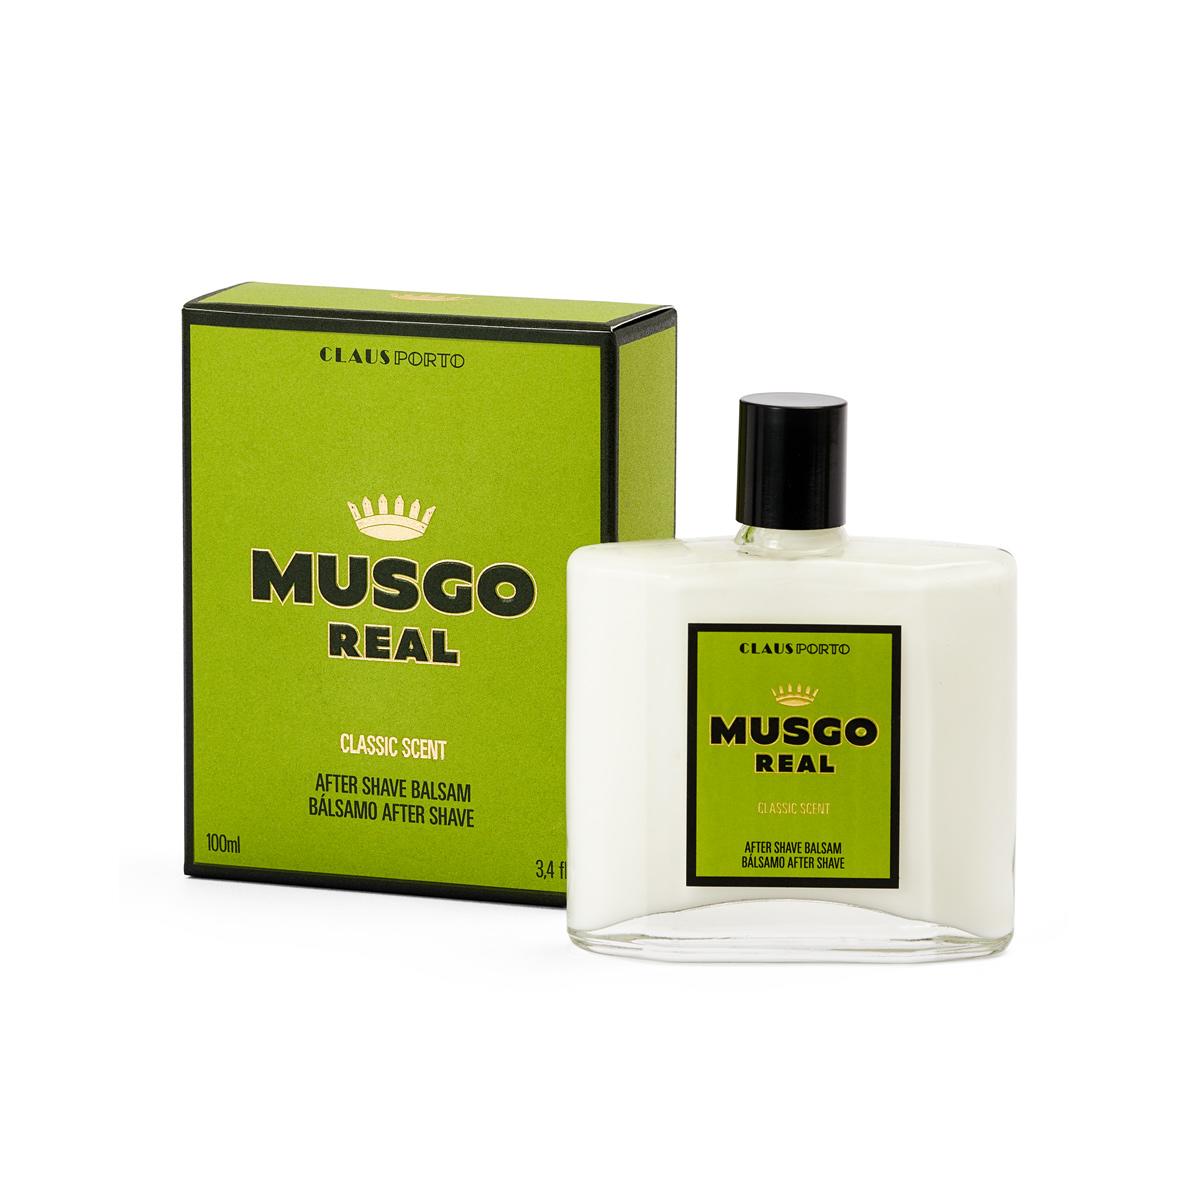 Musgo Real Aftershave Balm Classic Scent 100ml